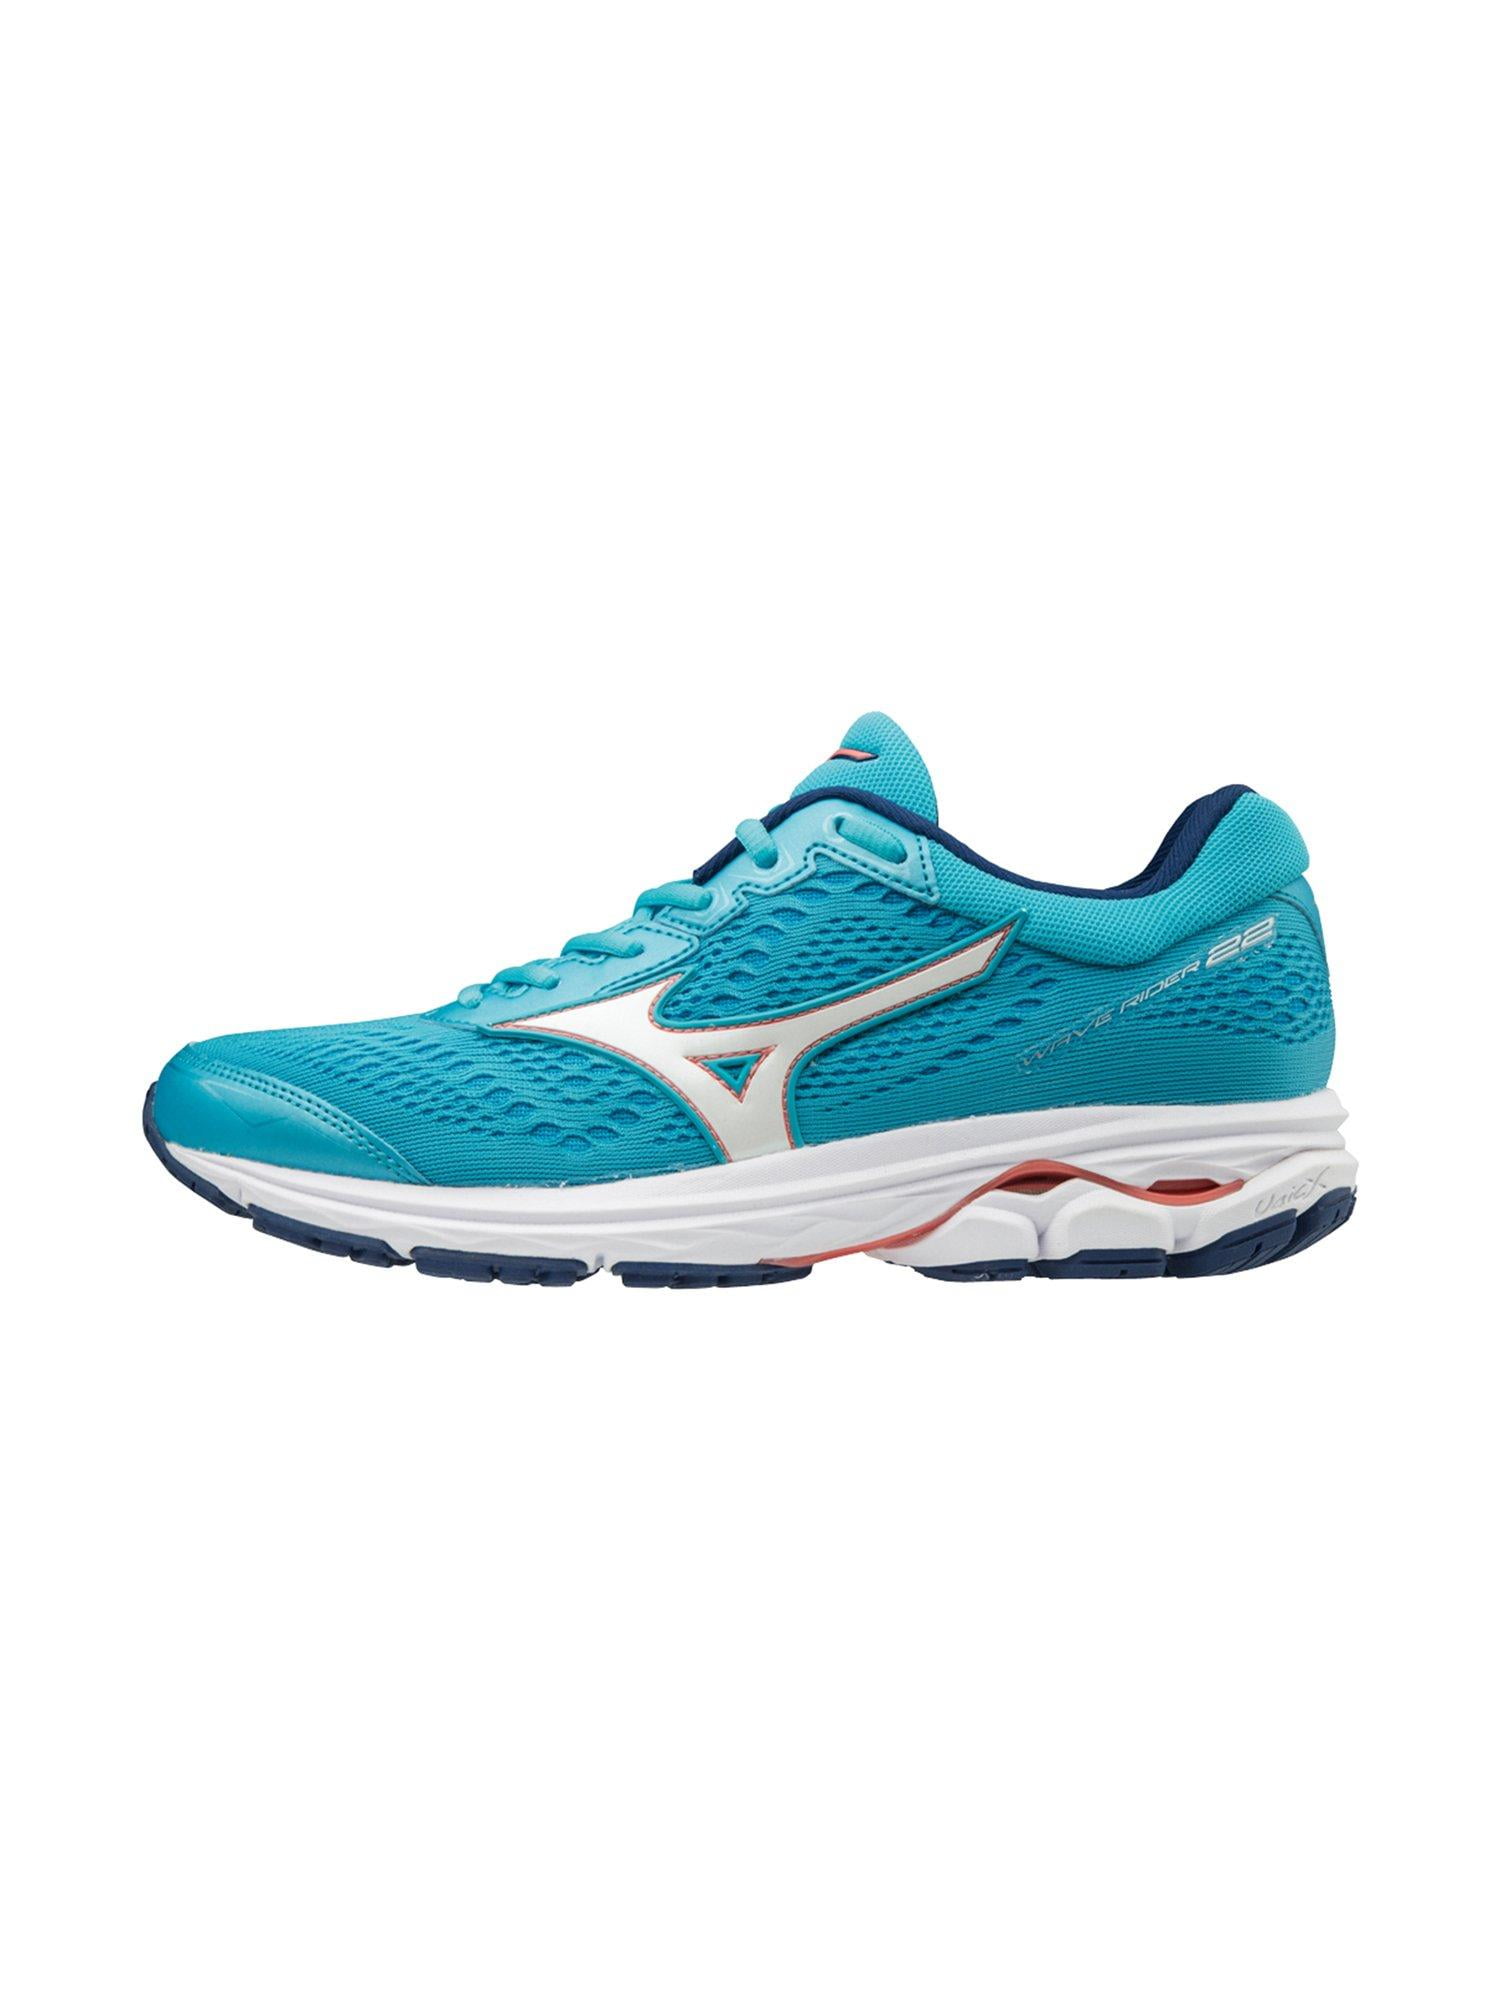 womens wide running shoes